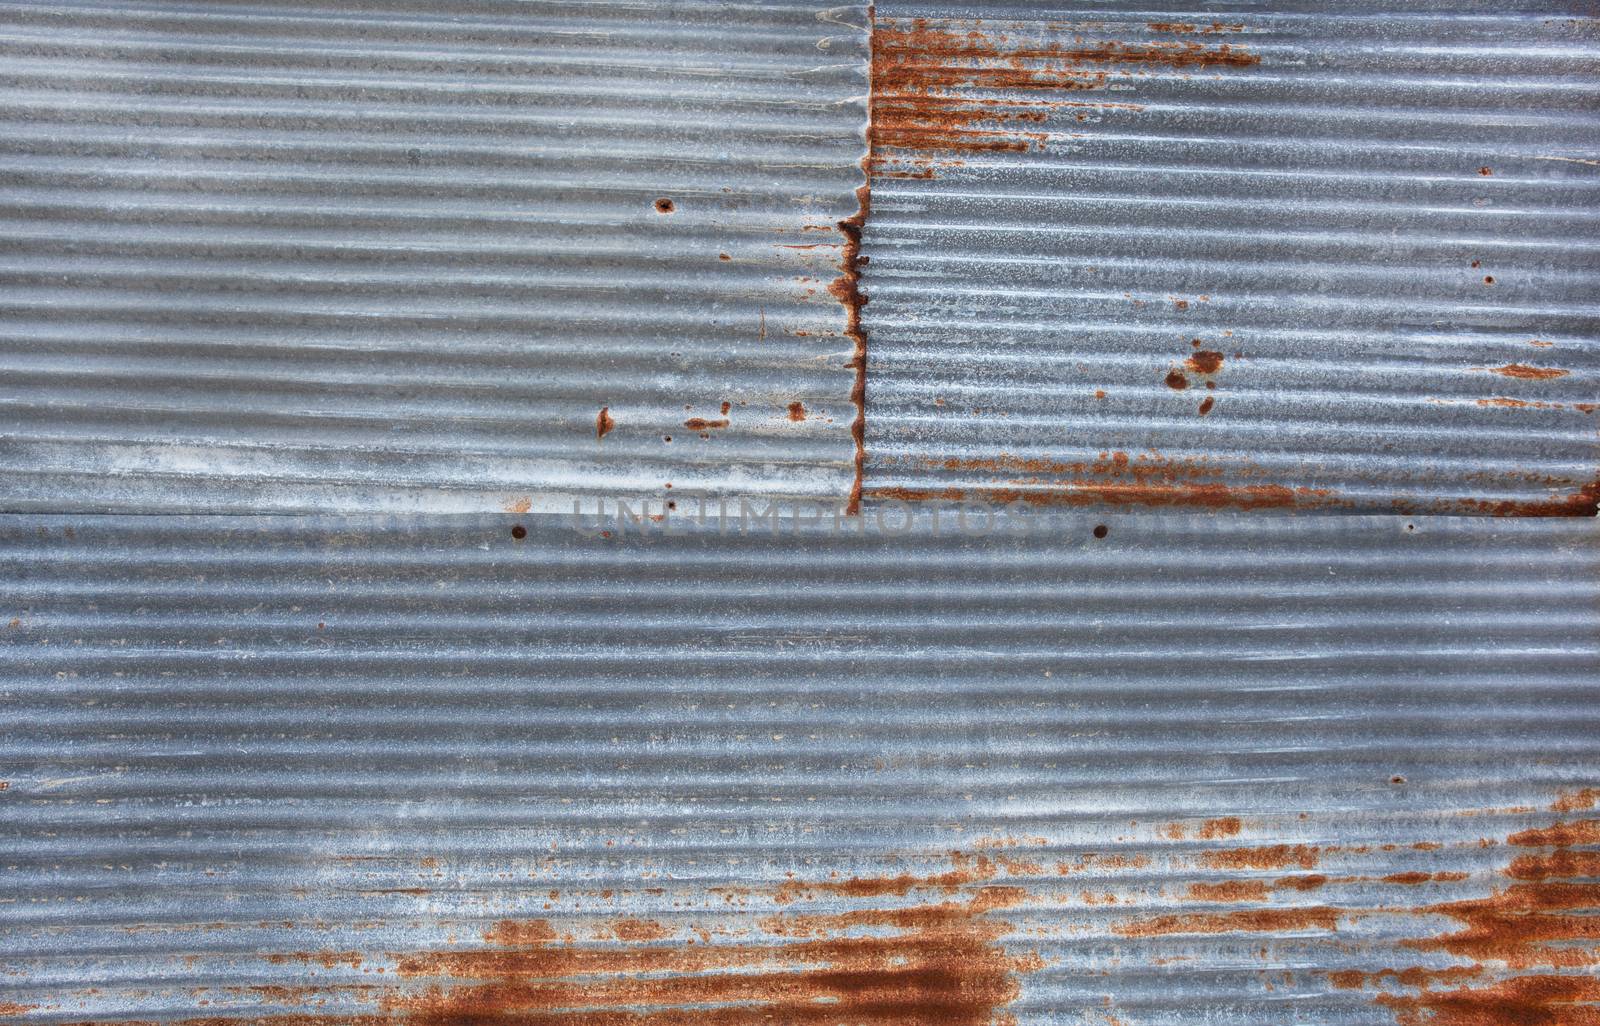 Old rusty zinc sheets for textured abstract background by Bowonpat